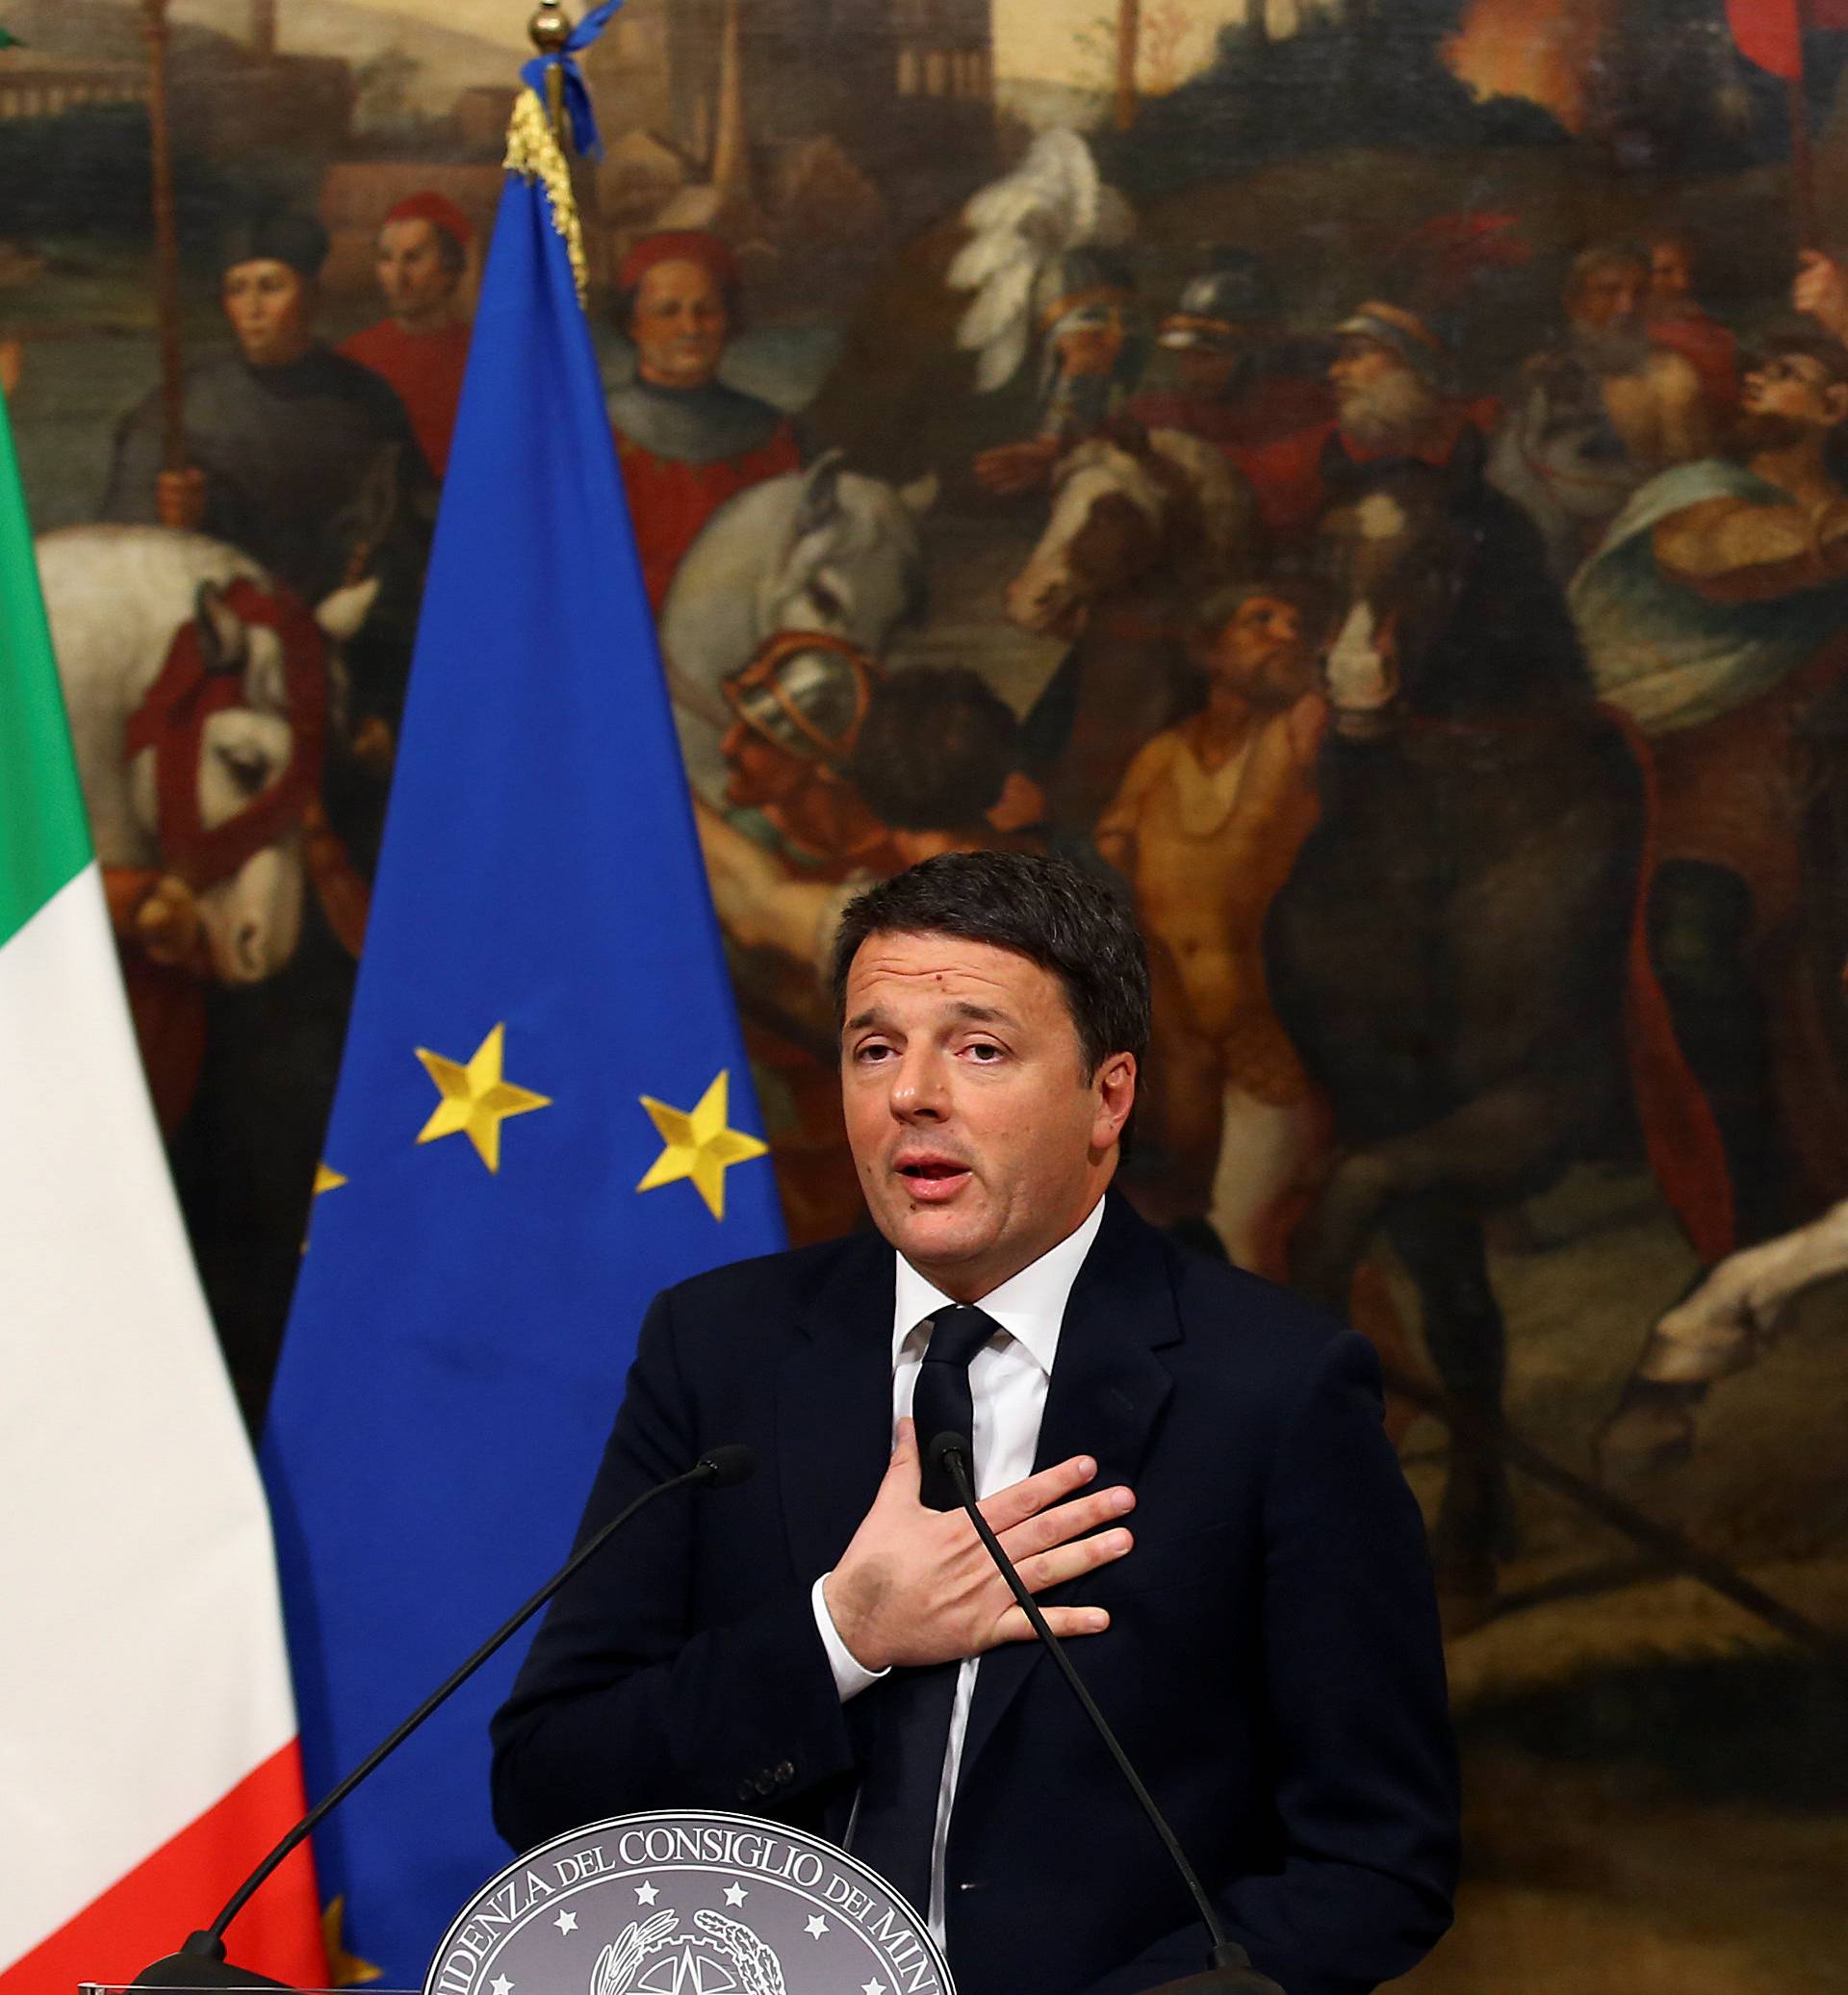 Italian PM Renzi speaks during a media conference after a referendum on constitutional reform at Chigi palace in Rome